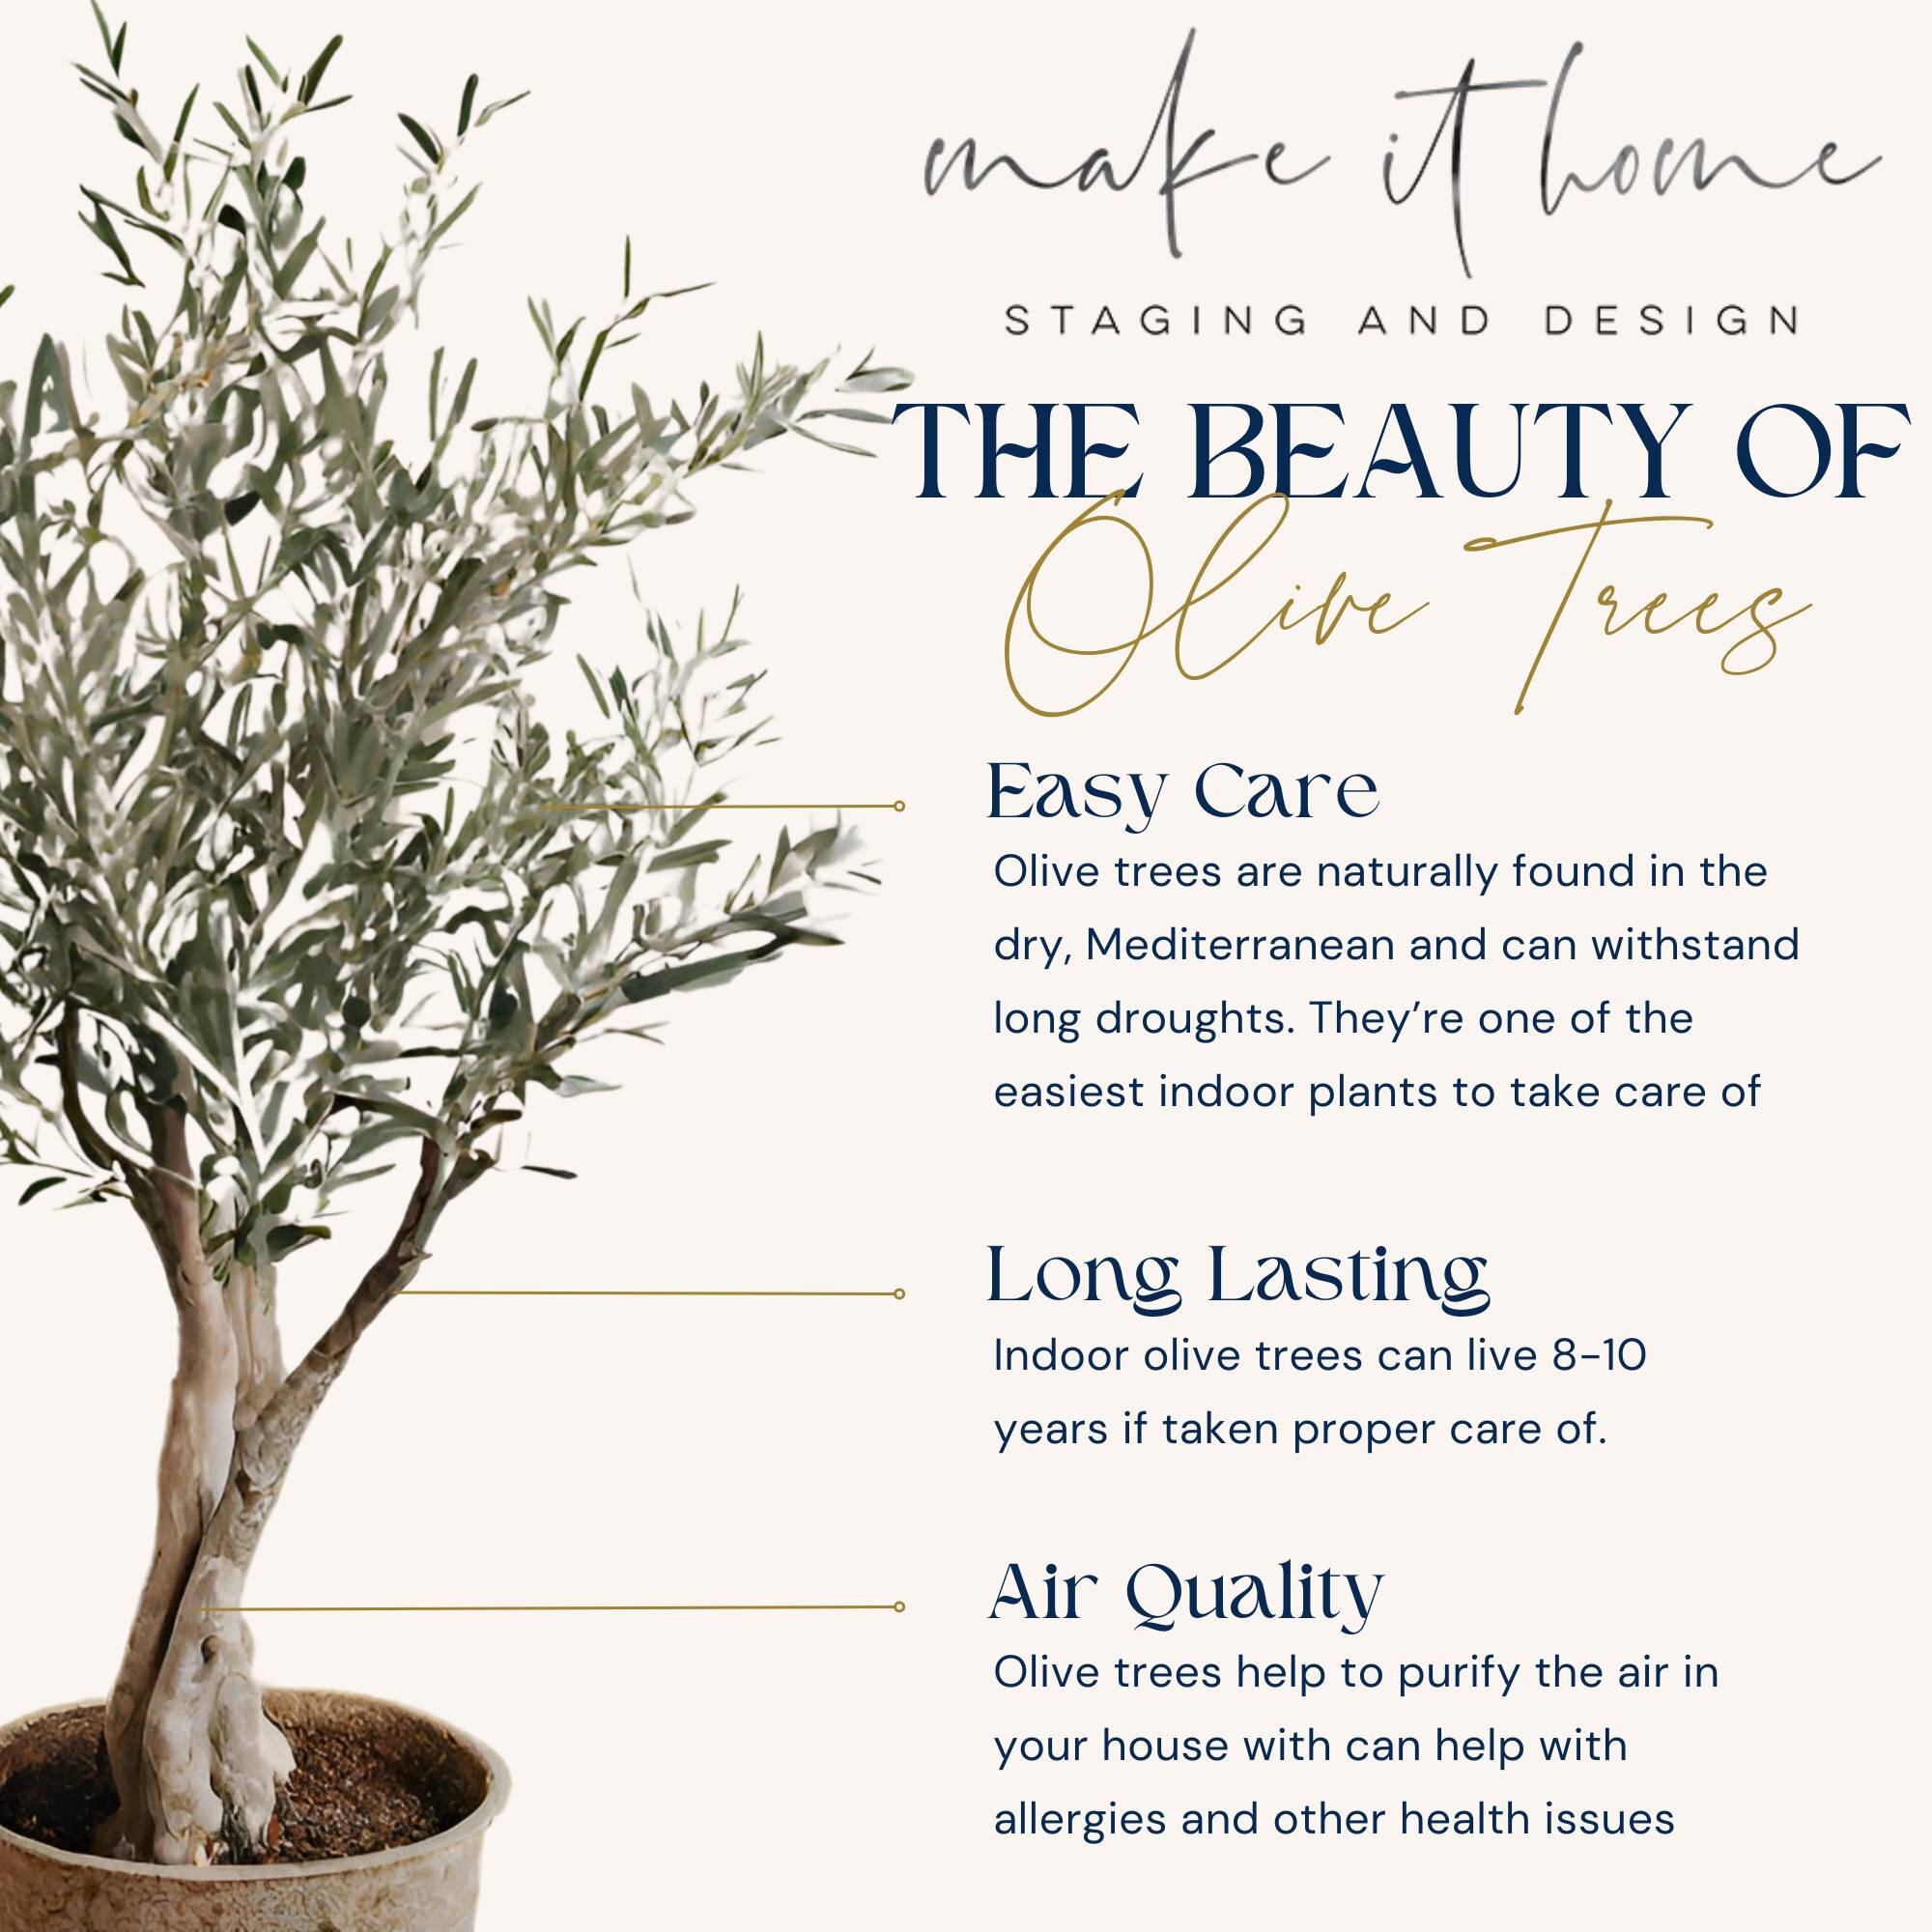 Do you want to add plants to your decor but have trouble keeping them alive? Try an olive tree! They are one of the easiest house plants to take care of and they look great!

#homedecor #Interiordesign #homedesign #plants #indoorplants #greenecountyv